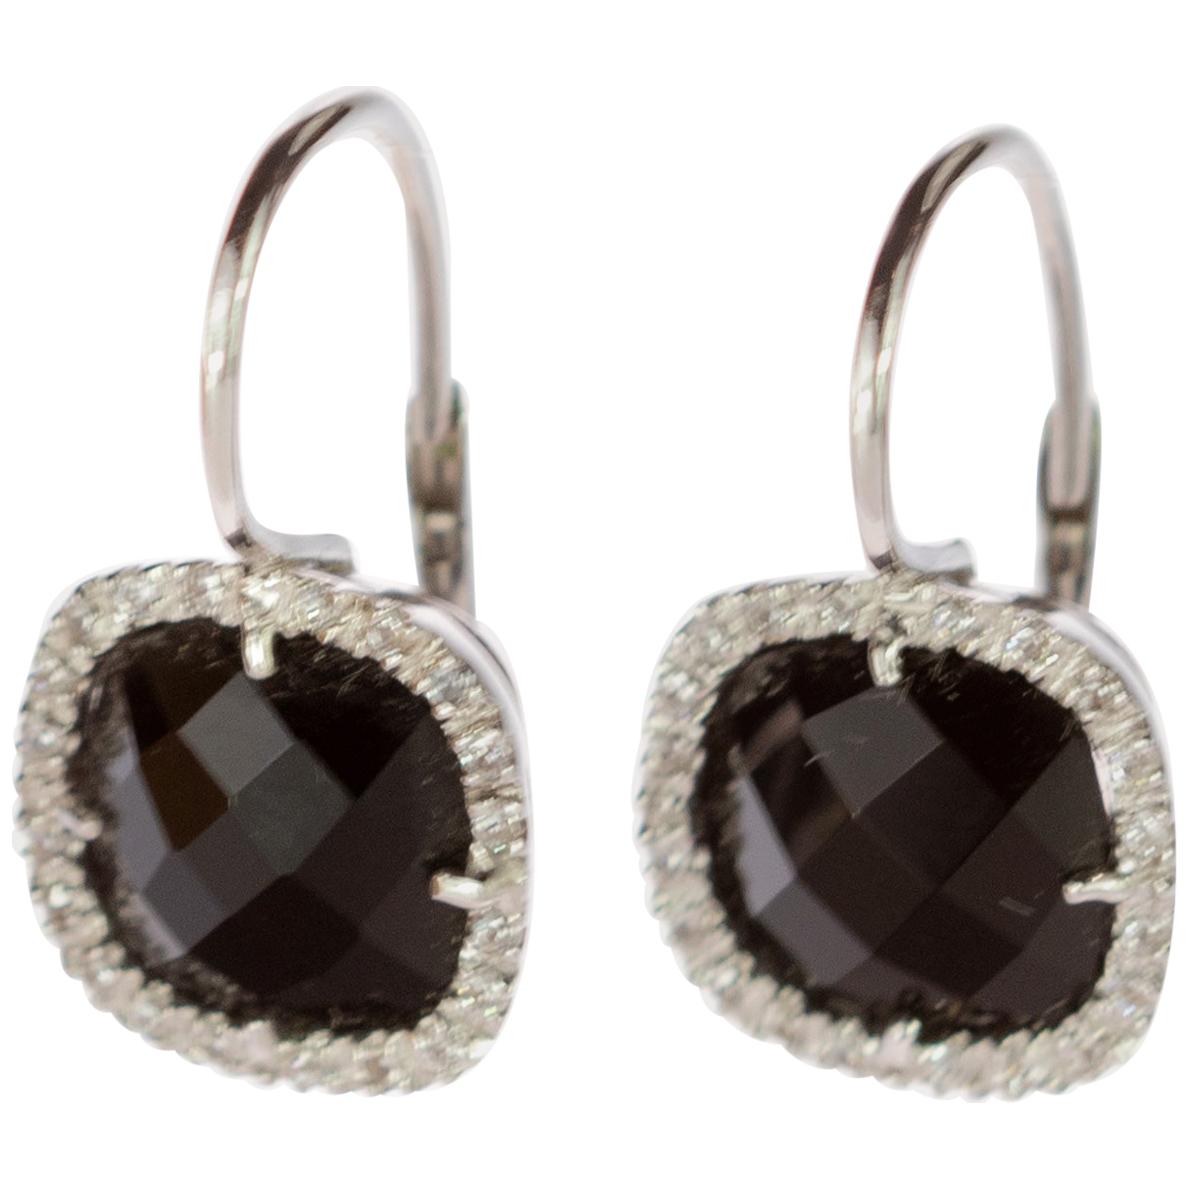 Vintage clip-on style earrings featured by a beautiful black square cushion onyx delicately surrounded by 0.9 carat diamonds. The stunning gems are setted in 18 karat white gold ear clips exceptionally priced. Black and white are the colors of